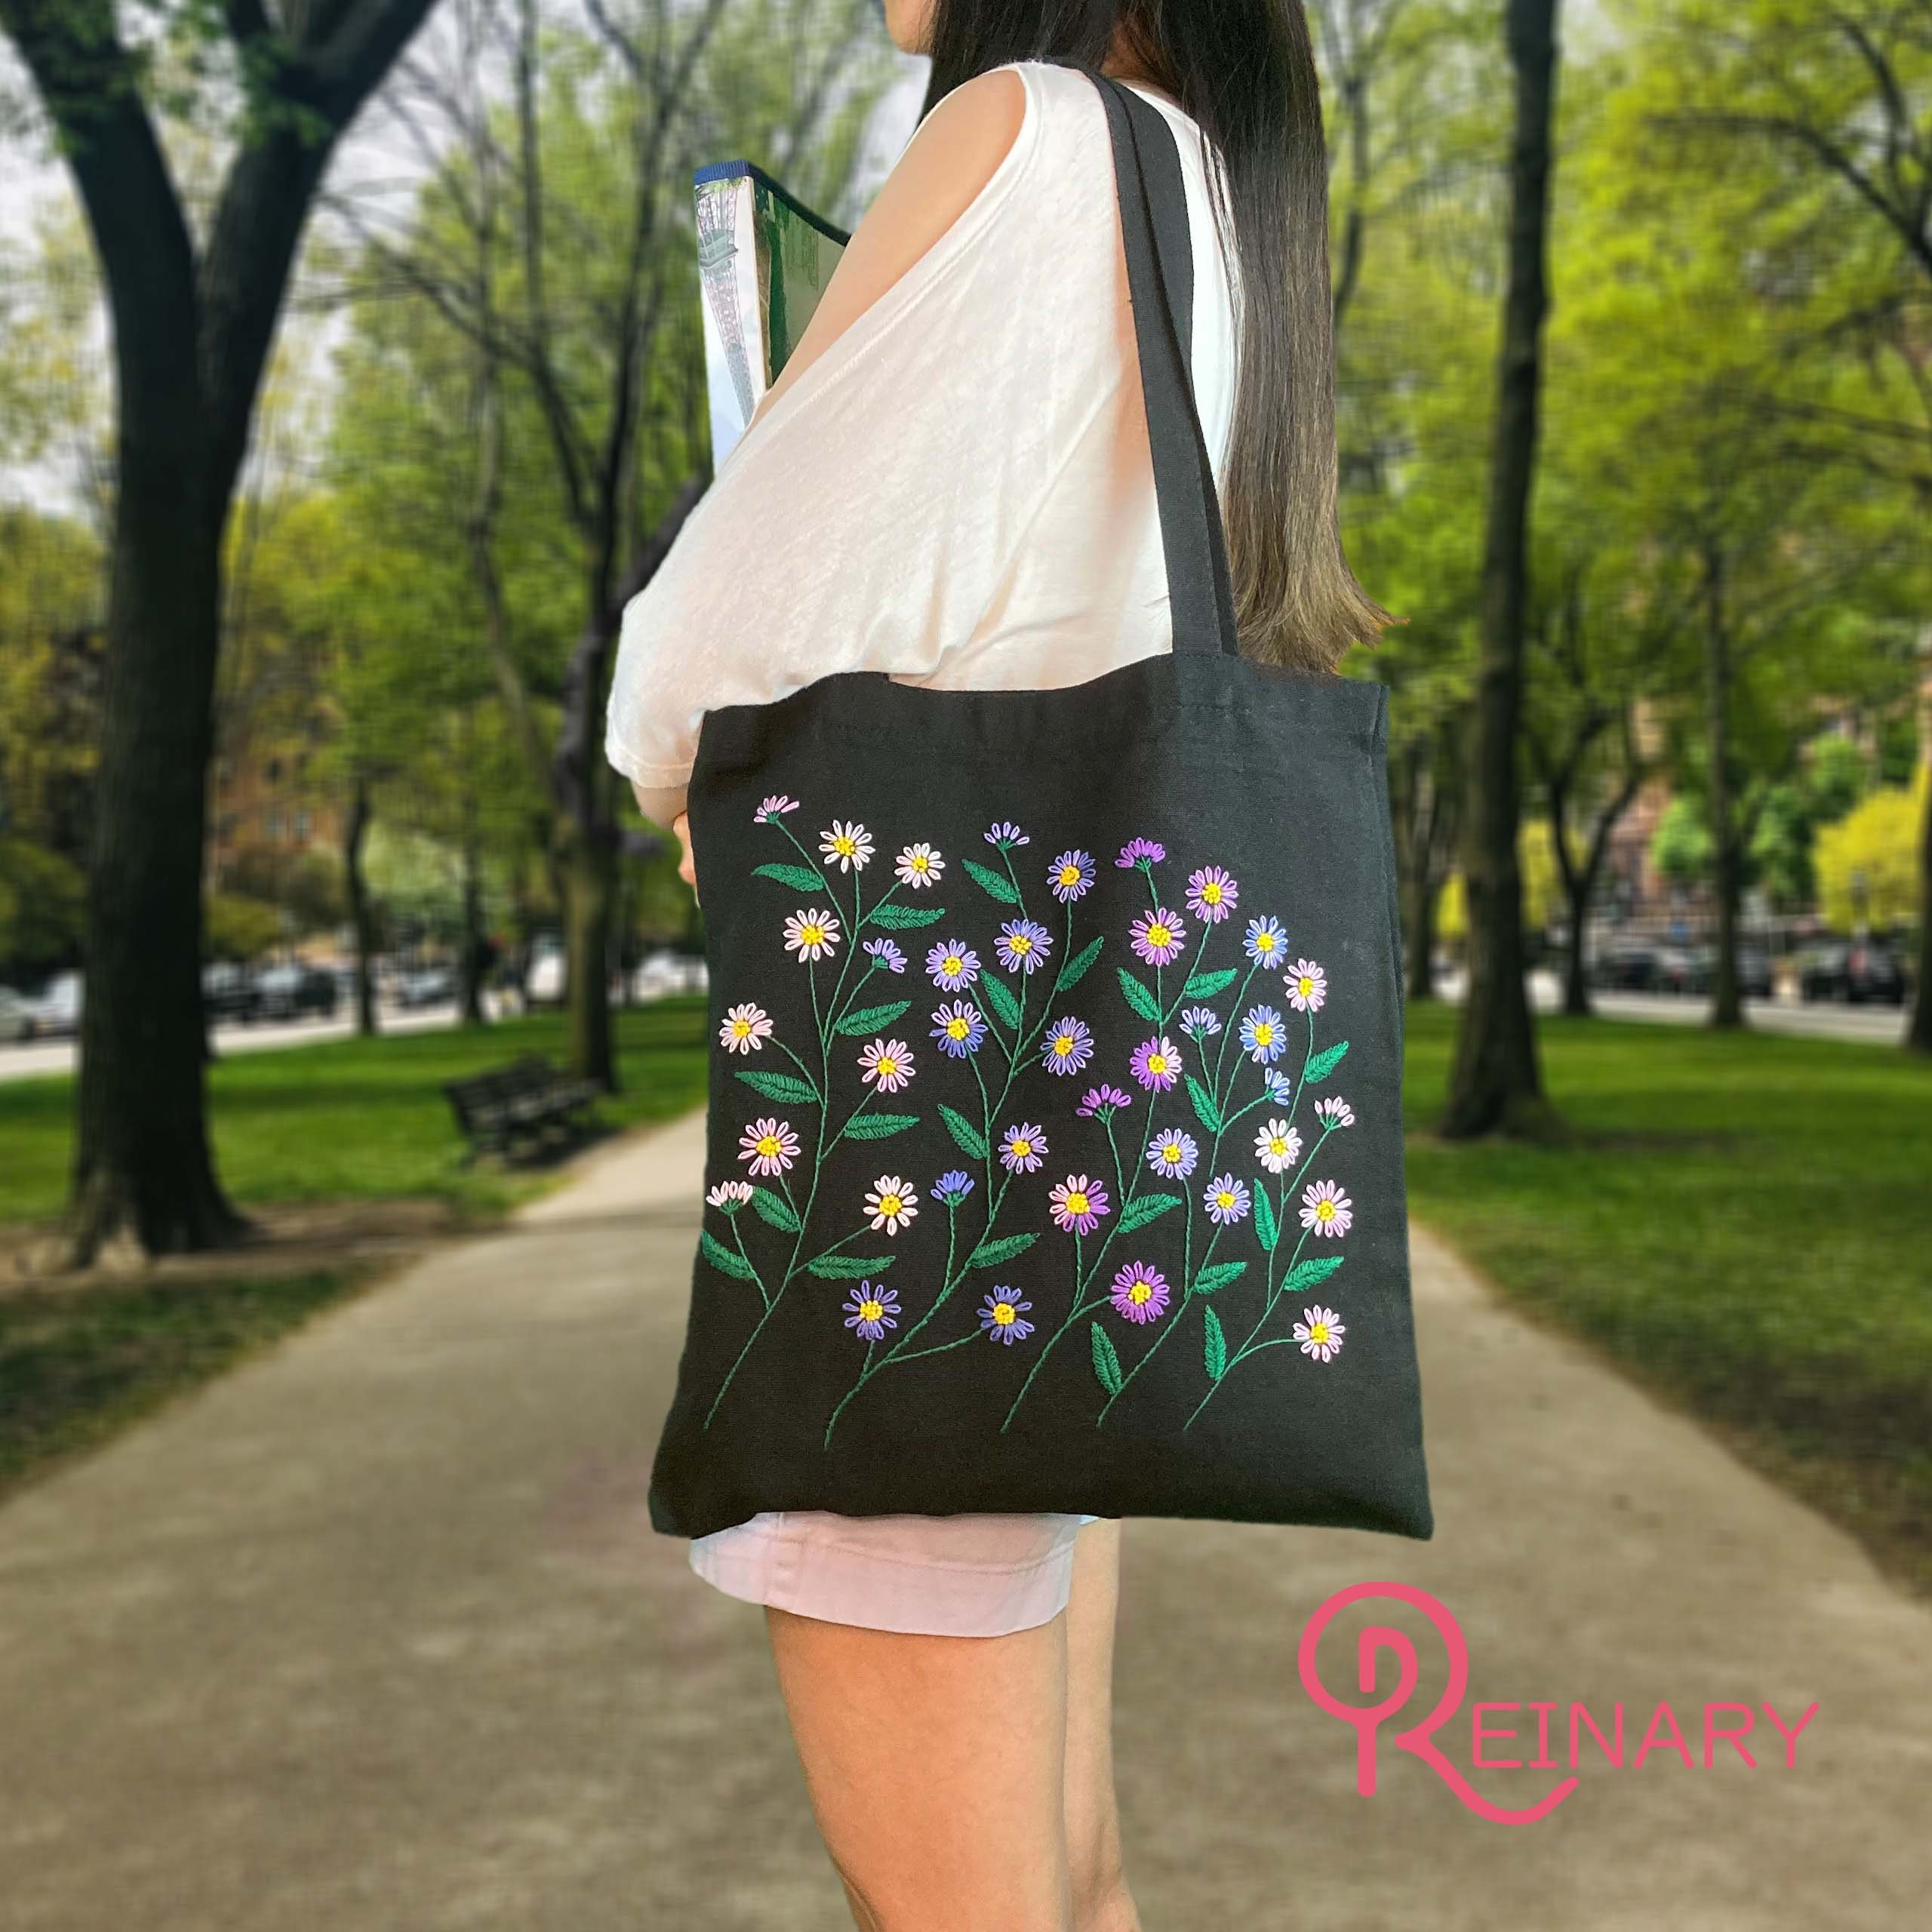 DIY Embroidery Bag for Women with Flower Pattern Handmade Craft for  Beginner Type A